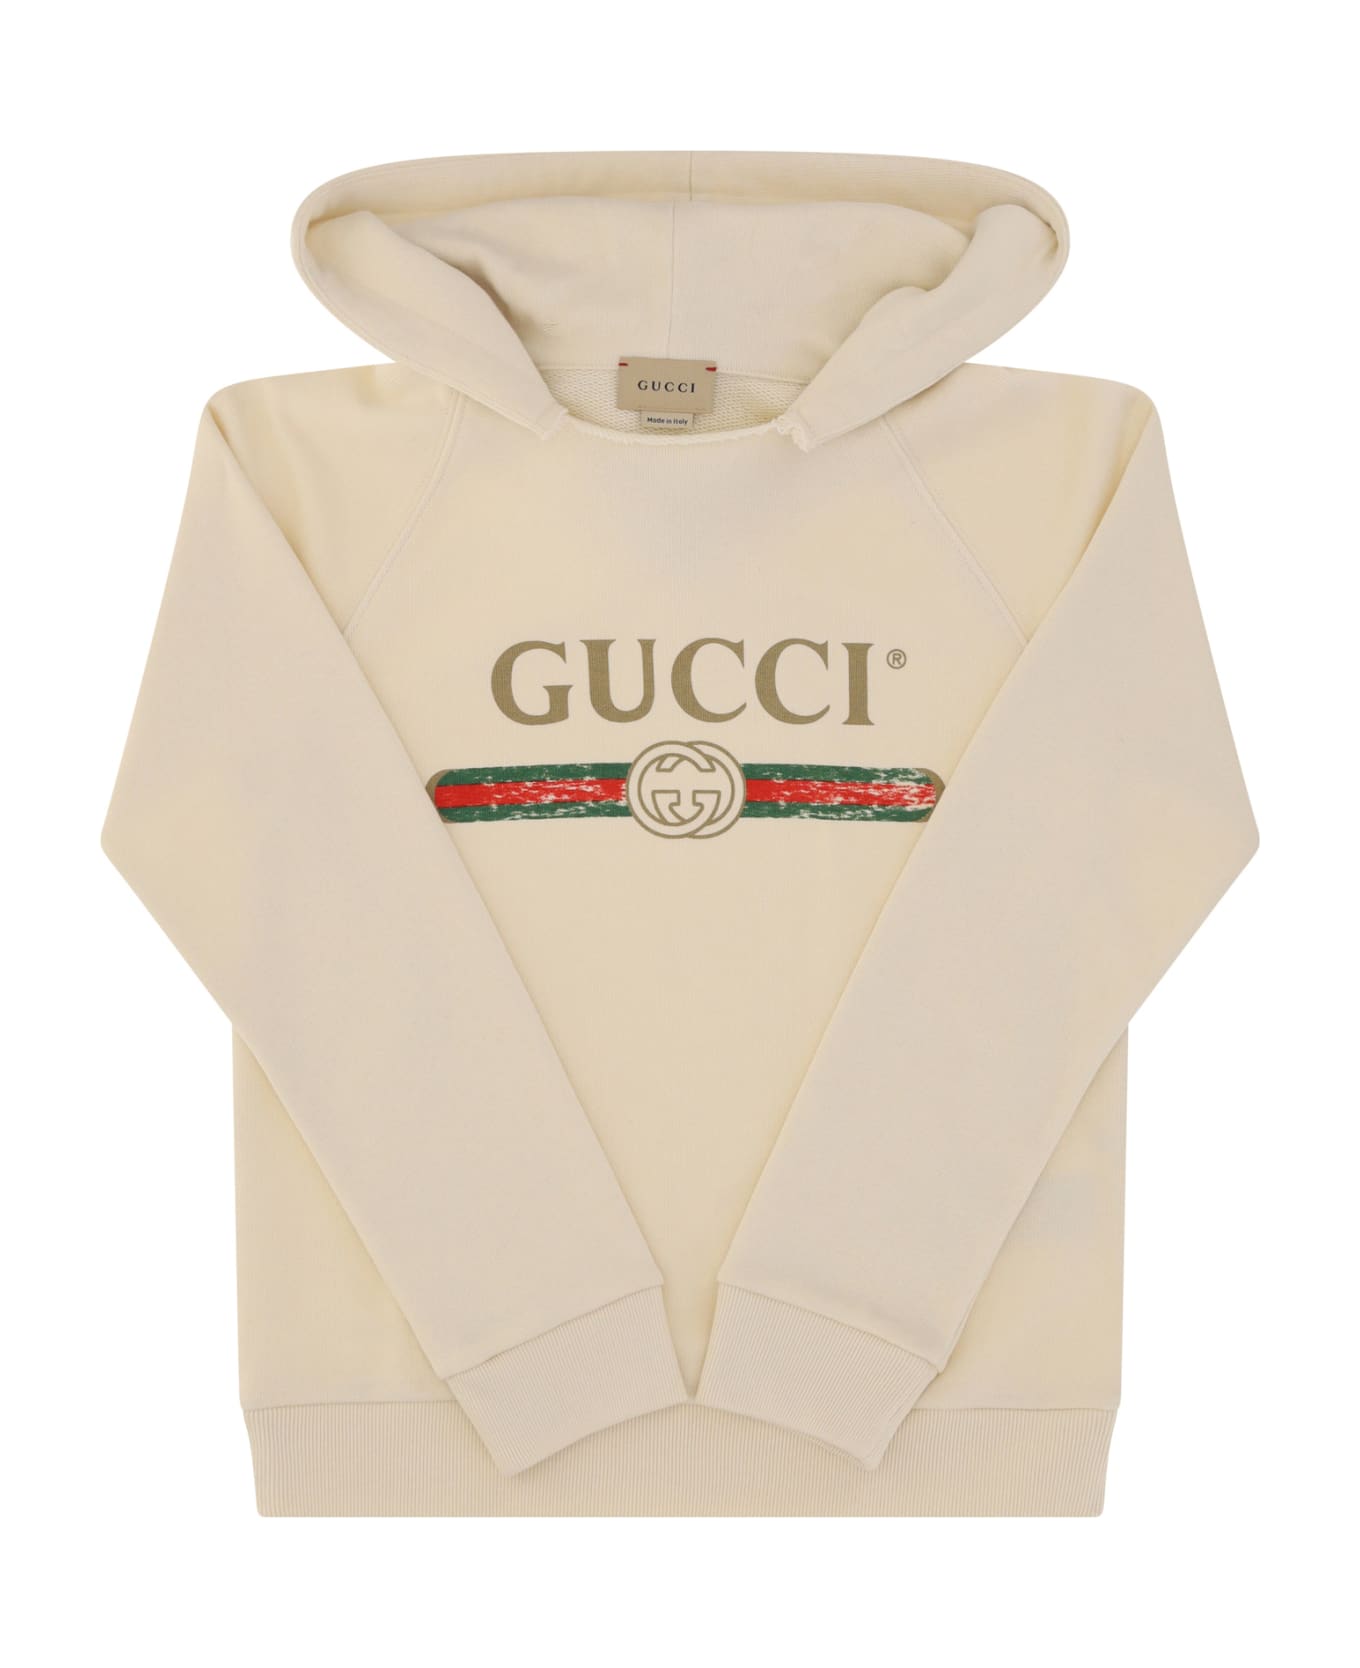 Gucci Hoodie For Boy - White